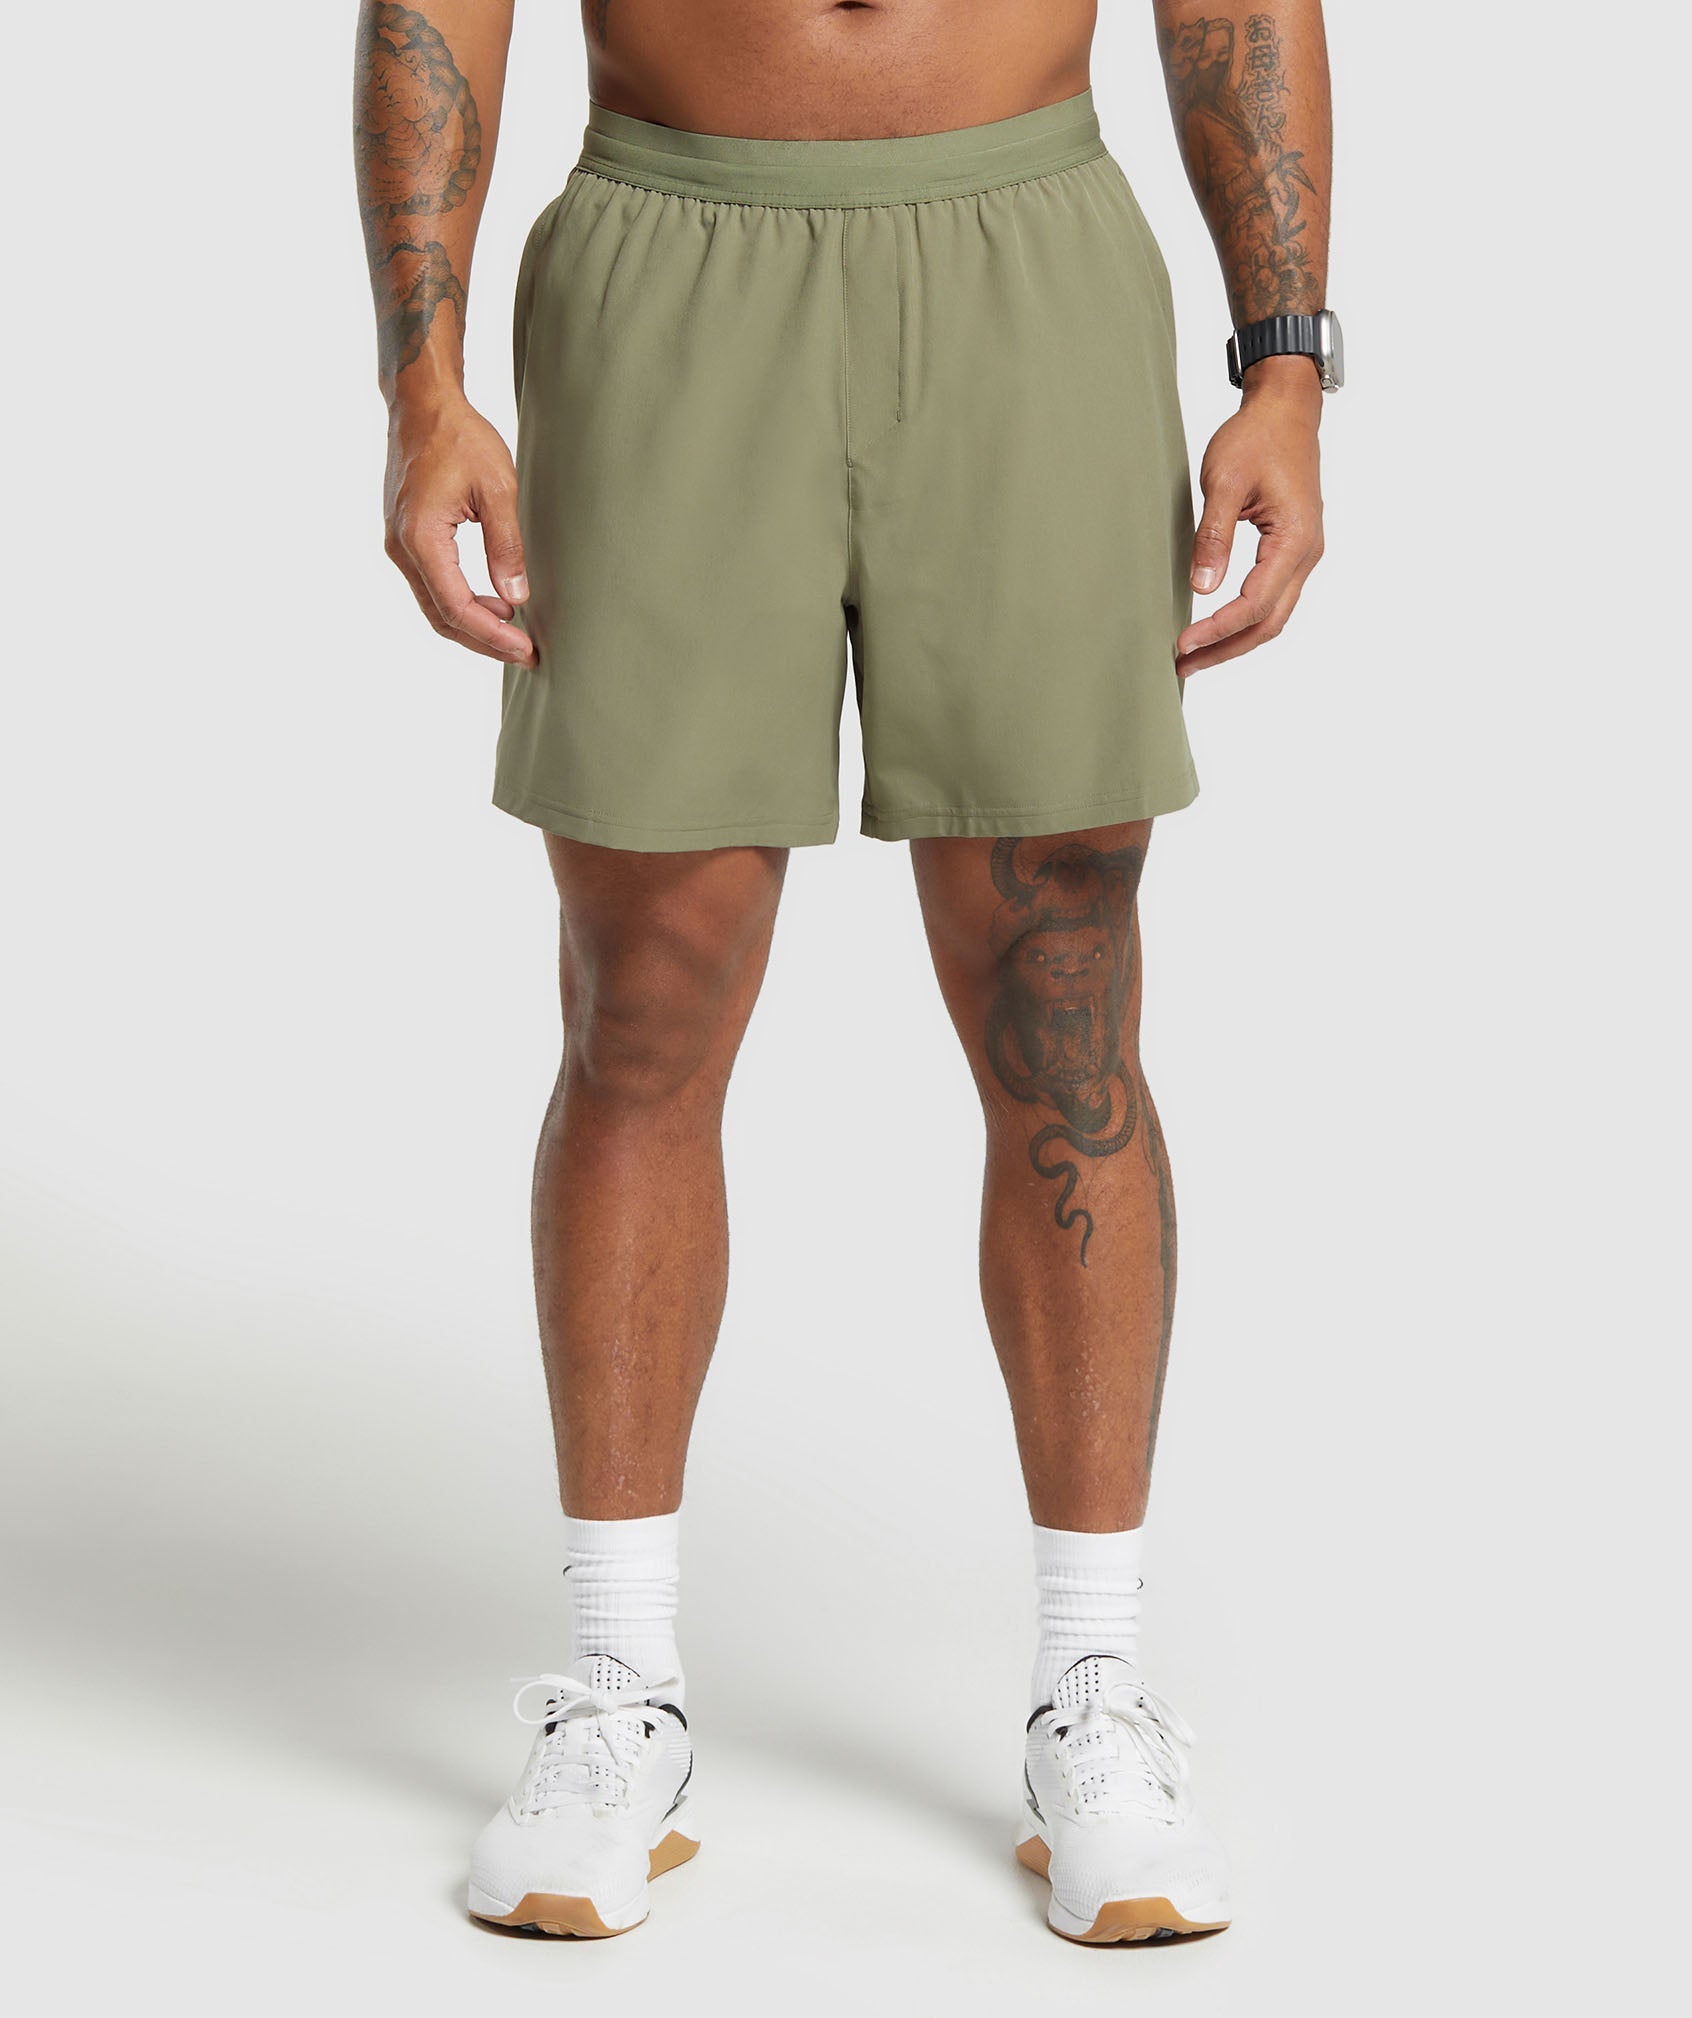 Land to Water 6" Shorts in Utility Green - view 1